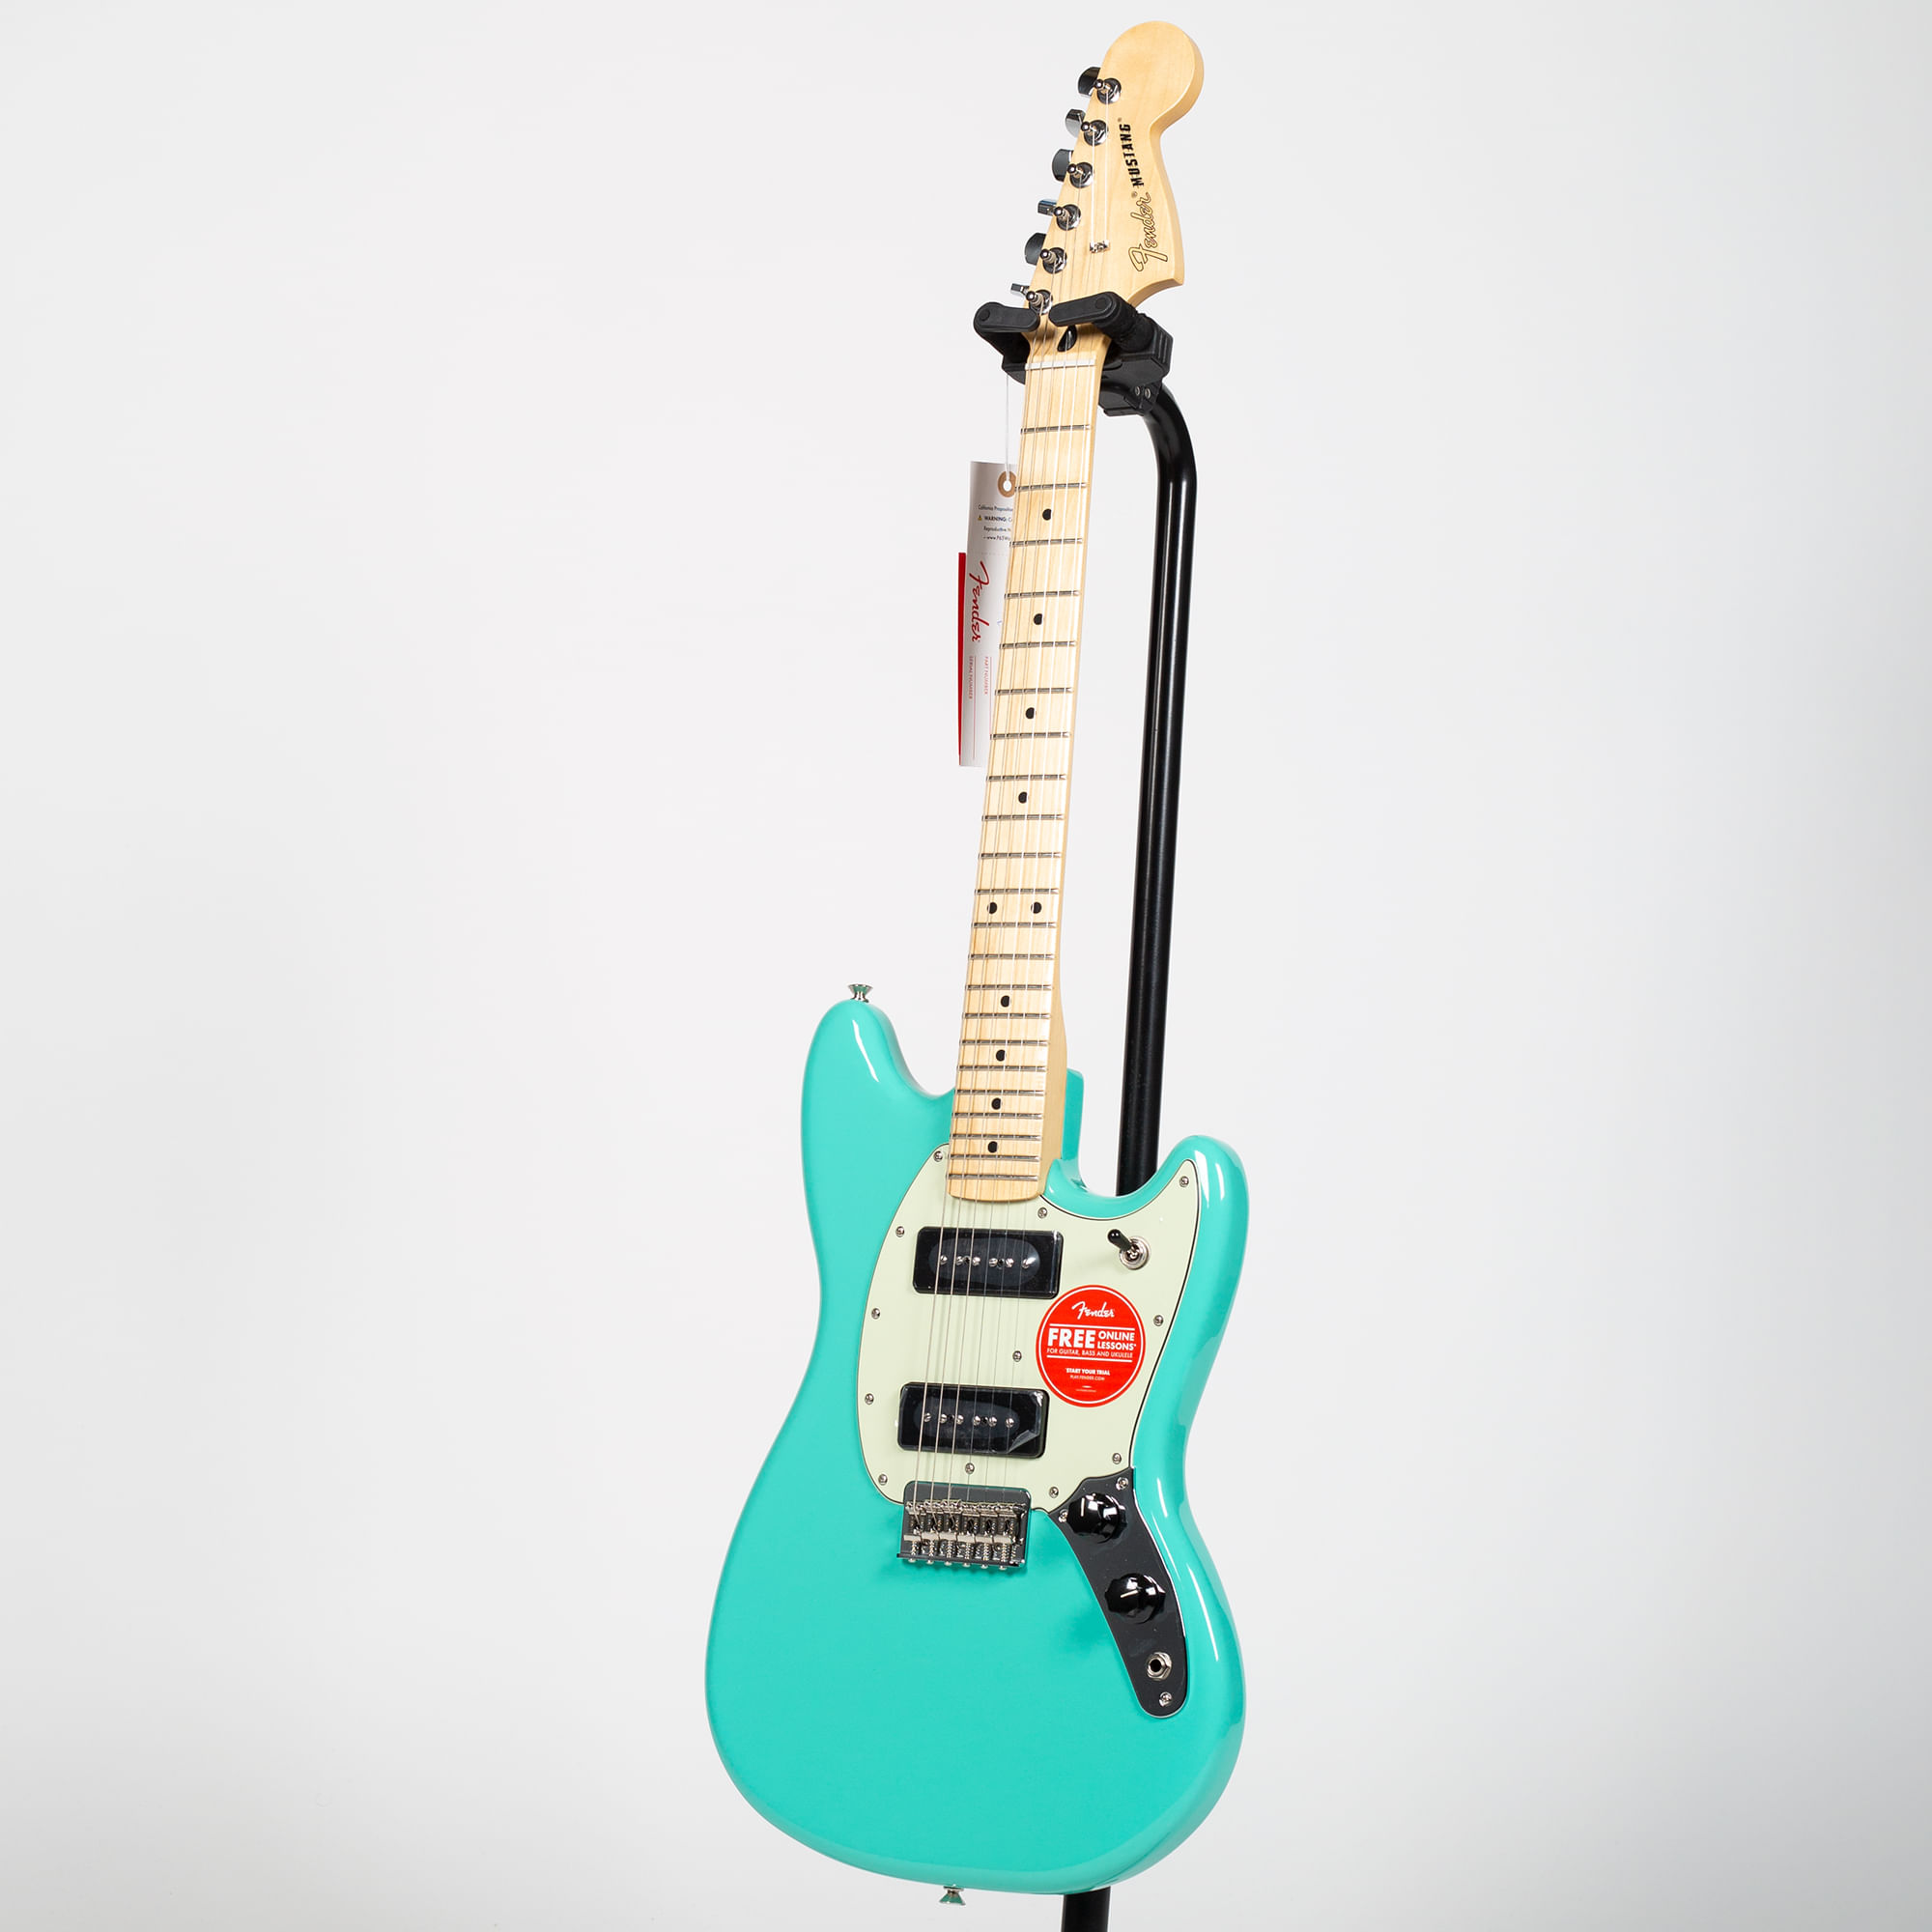 Fender　Cosmo　Player　Green　Seafoam　Mustang　90　Guitar　Electric　Music